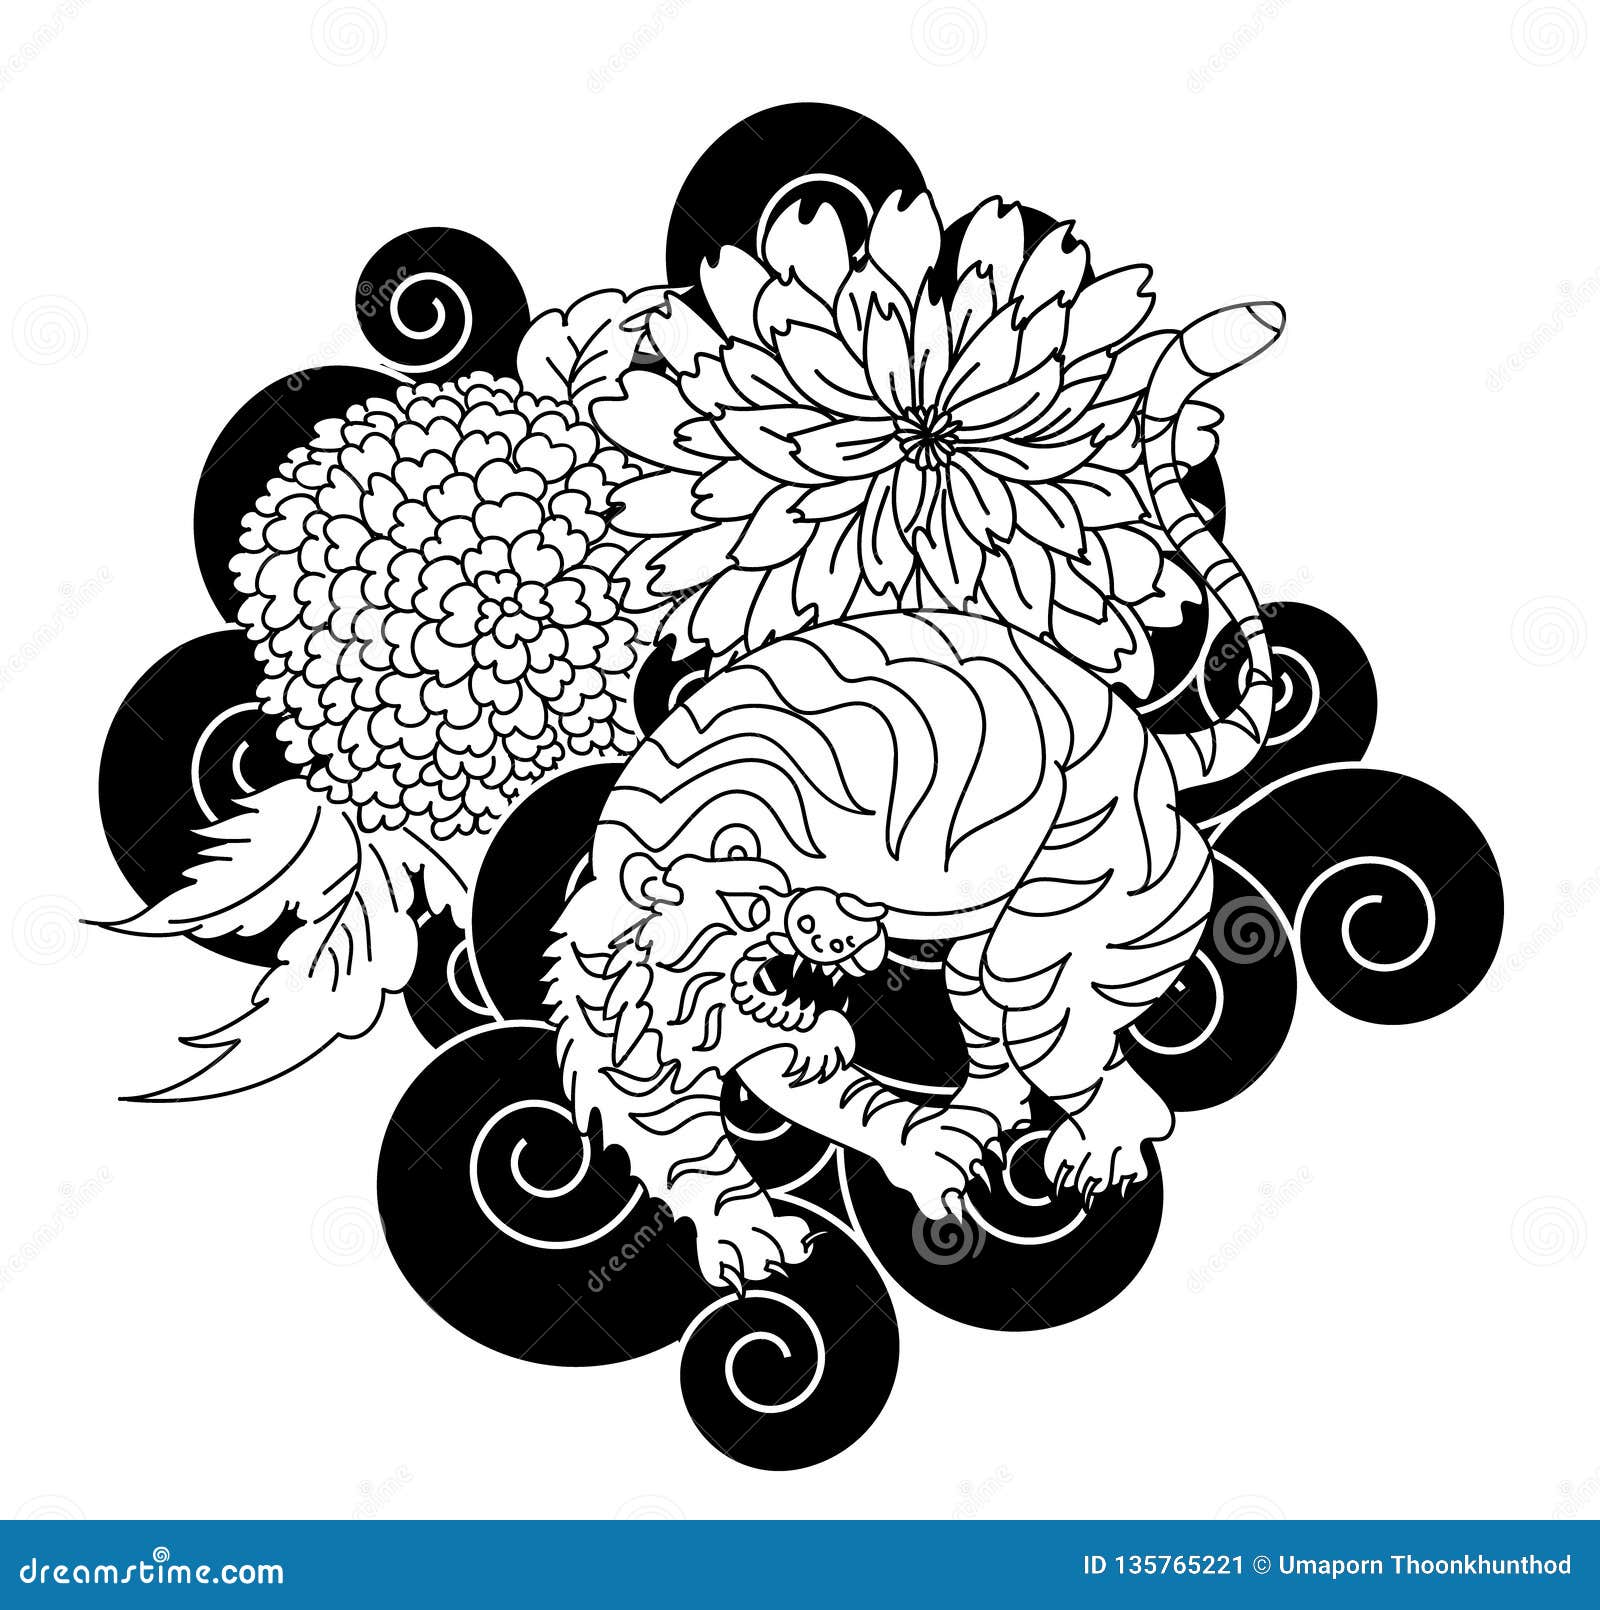 Japanese Tiger Vector Tattoo Lotus With Marigold Flower And Peony Flower On Cloud Stock Vector Illustration Of Asian Brossom